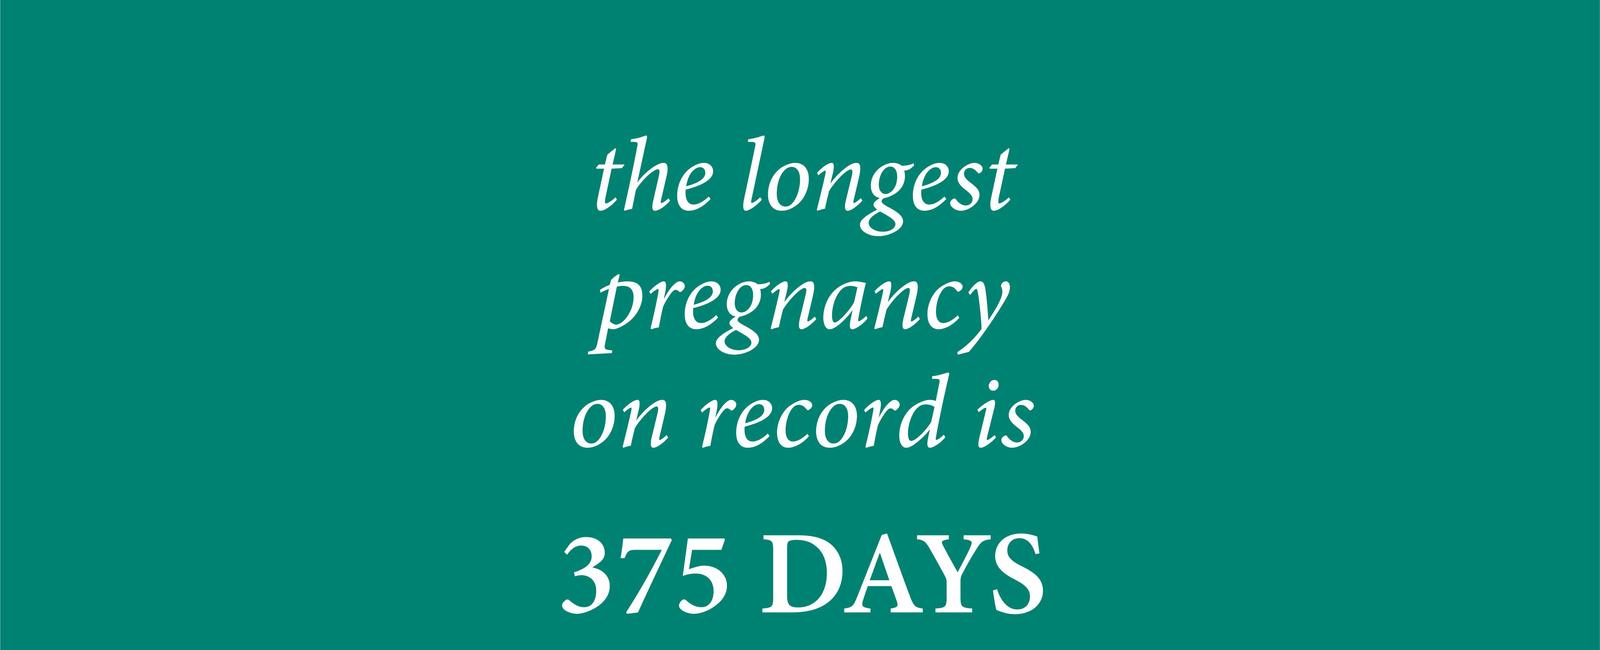 The longest pregnancy in humans on record is 375 days 12 5 months